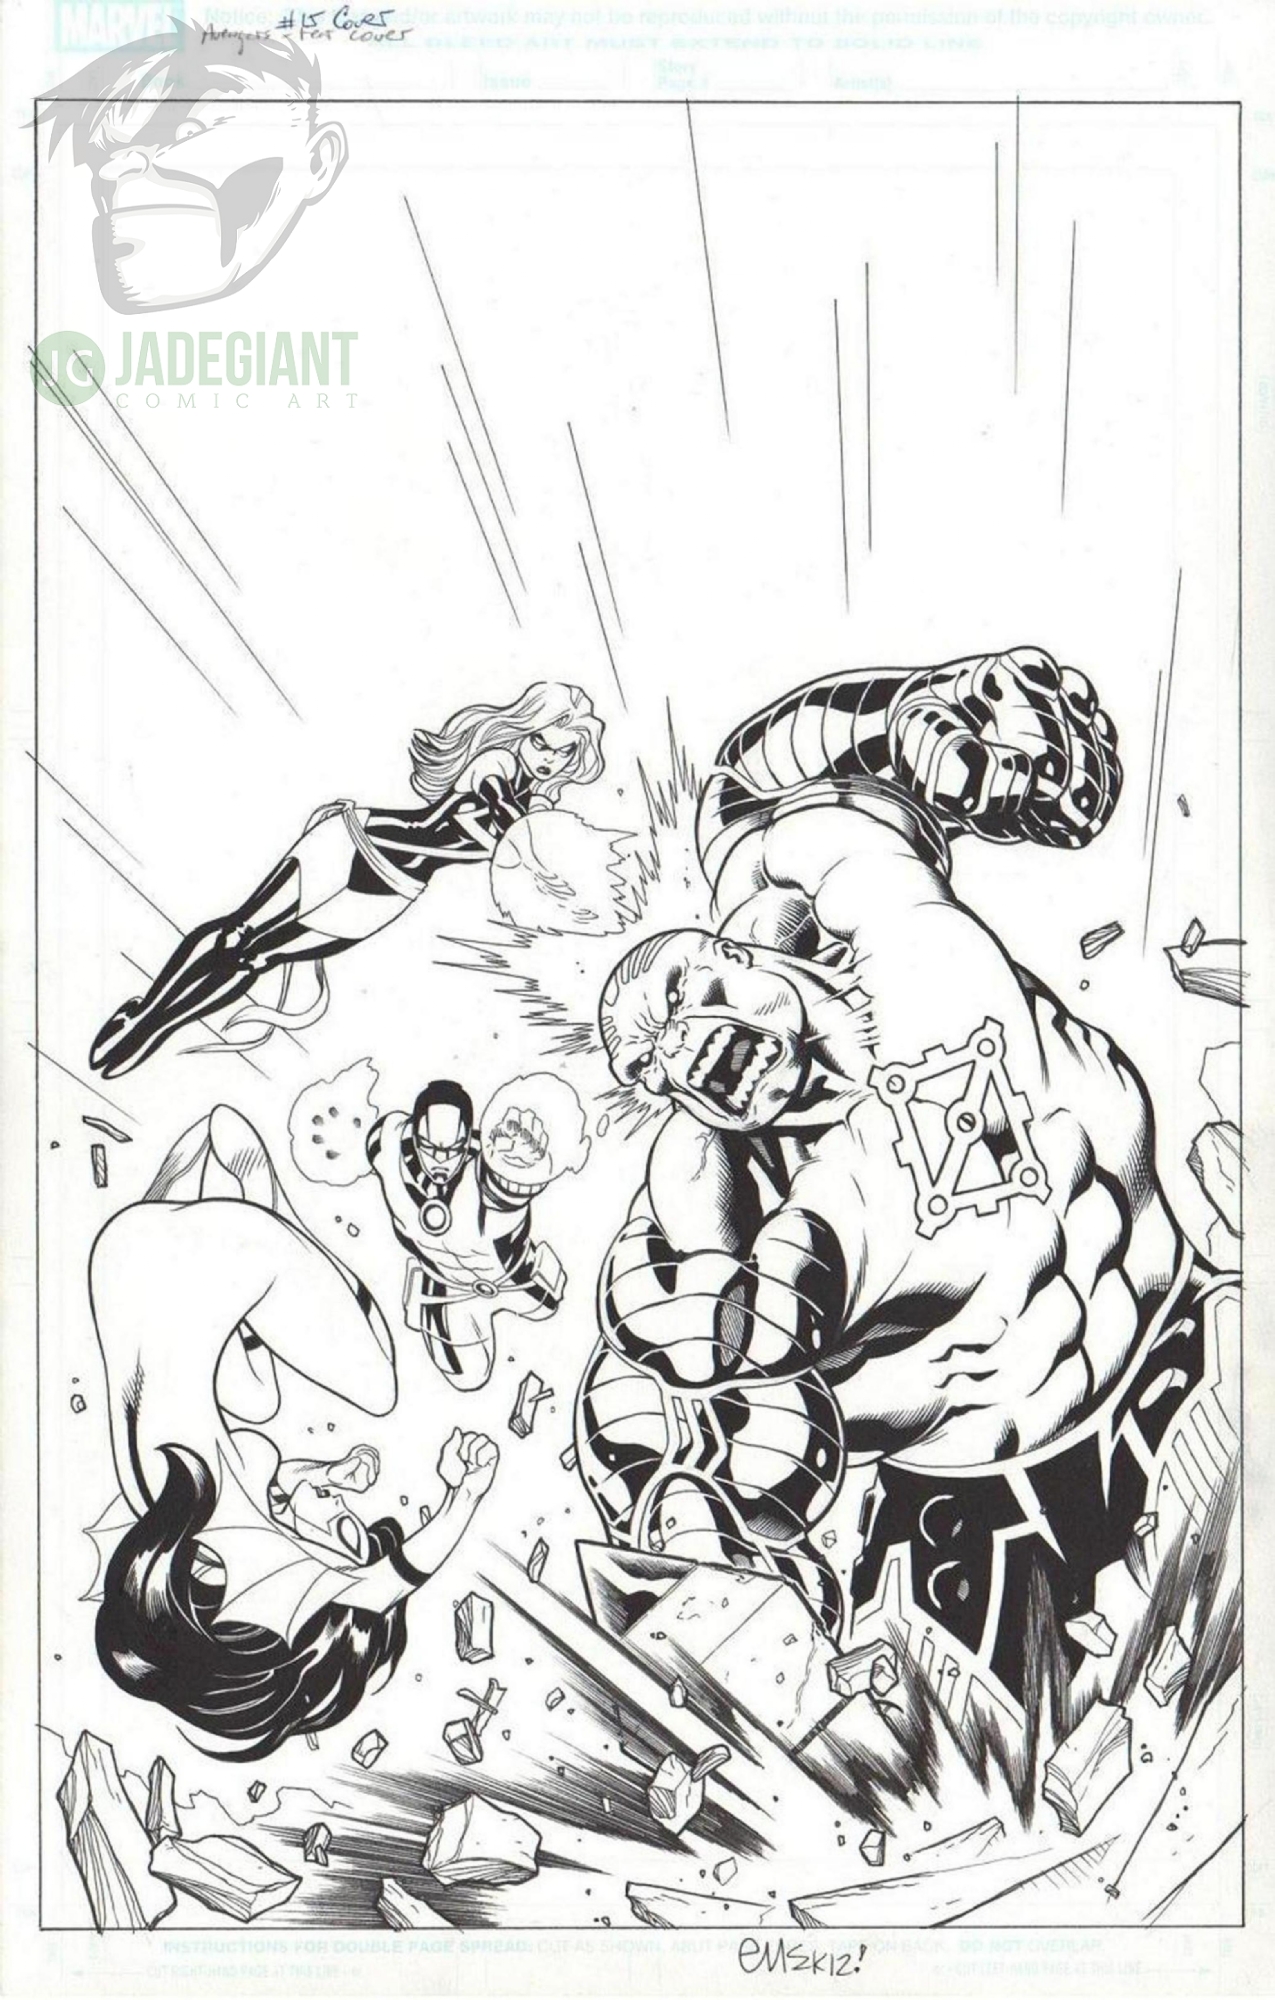 2011 Avengers Vol 4  issue 15 Fear Itself by Ed McGuinness with Hulk, Spider-Woman, Ms. Marvel, and the Protector Comic Art